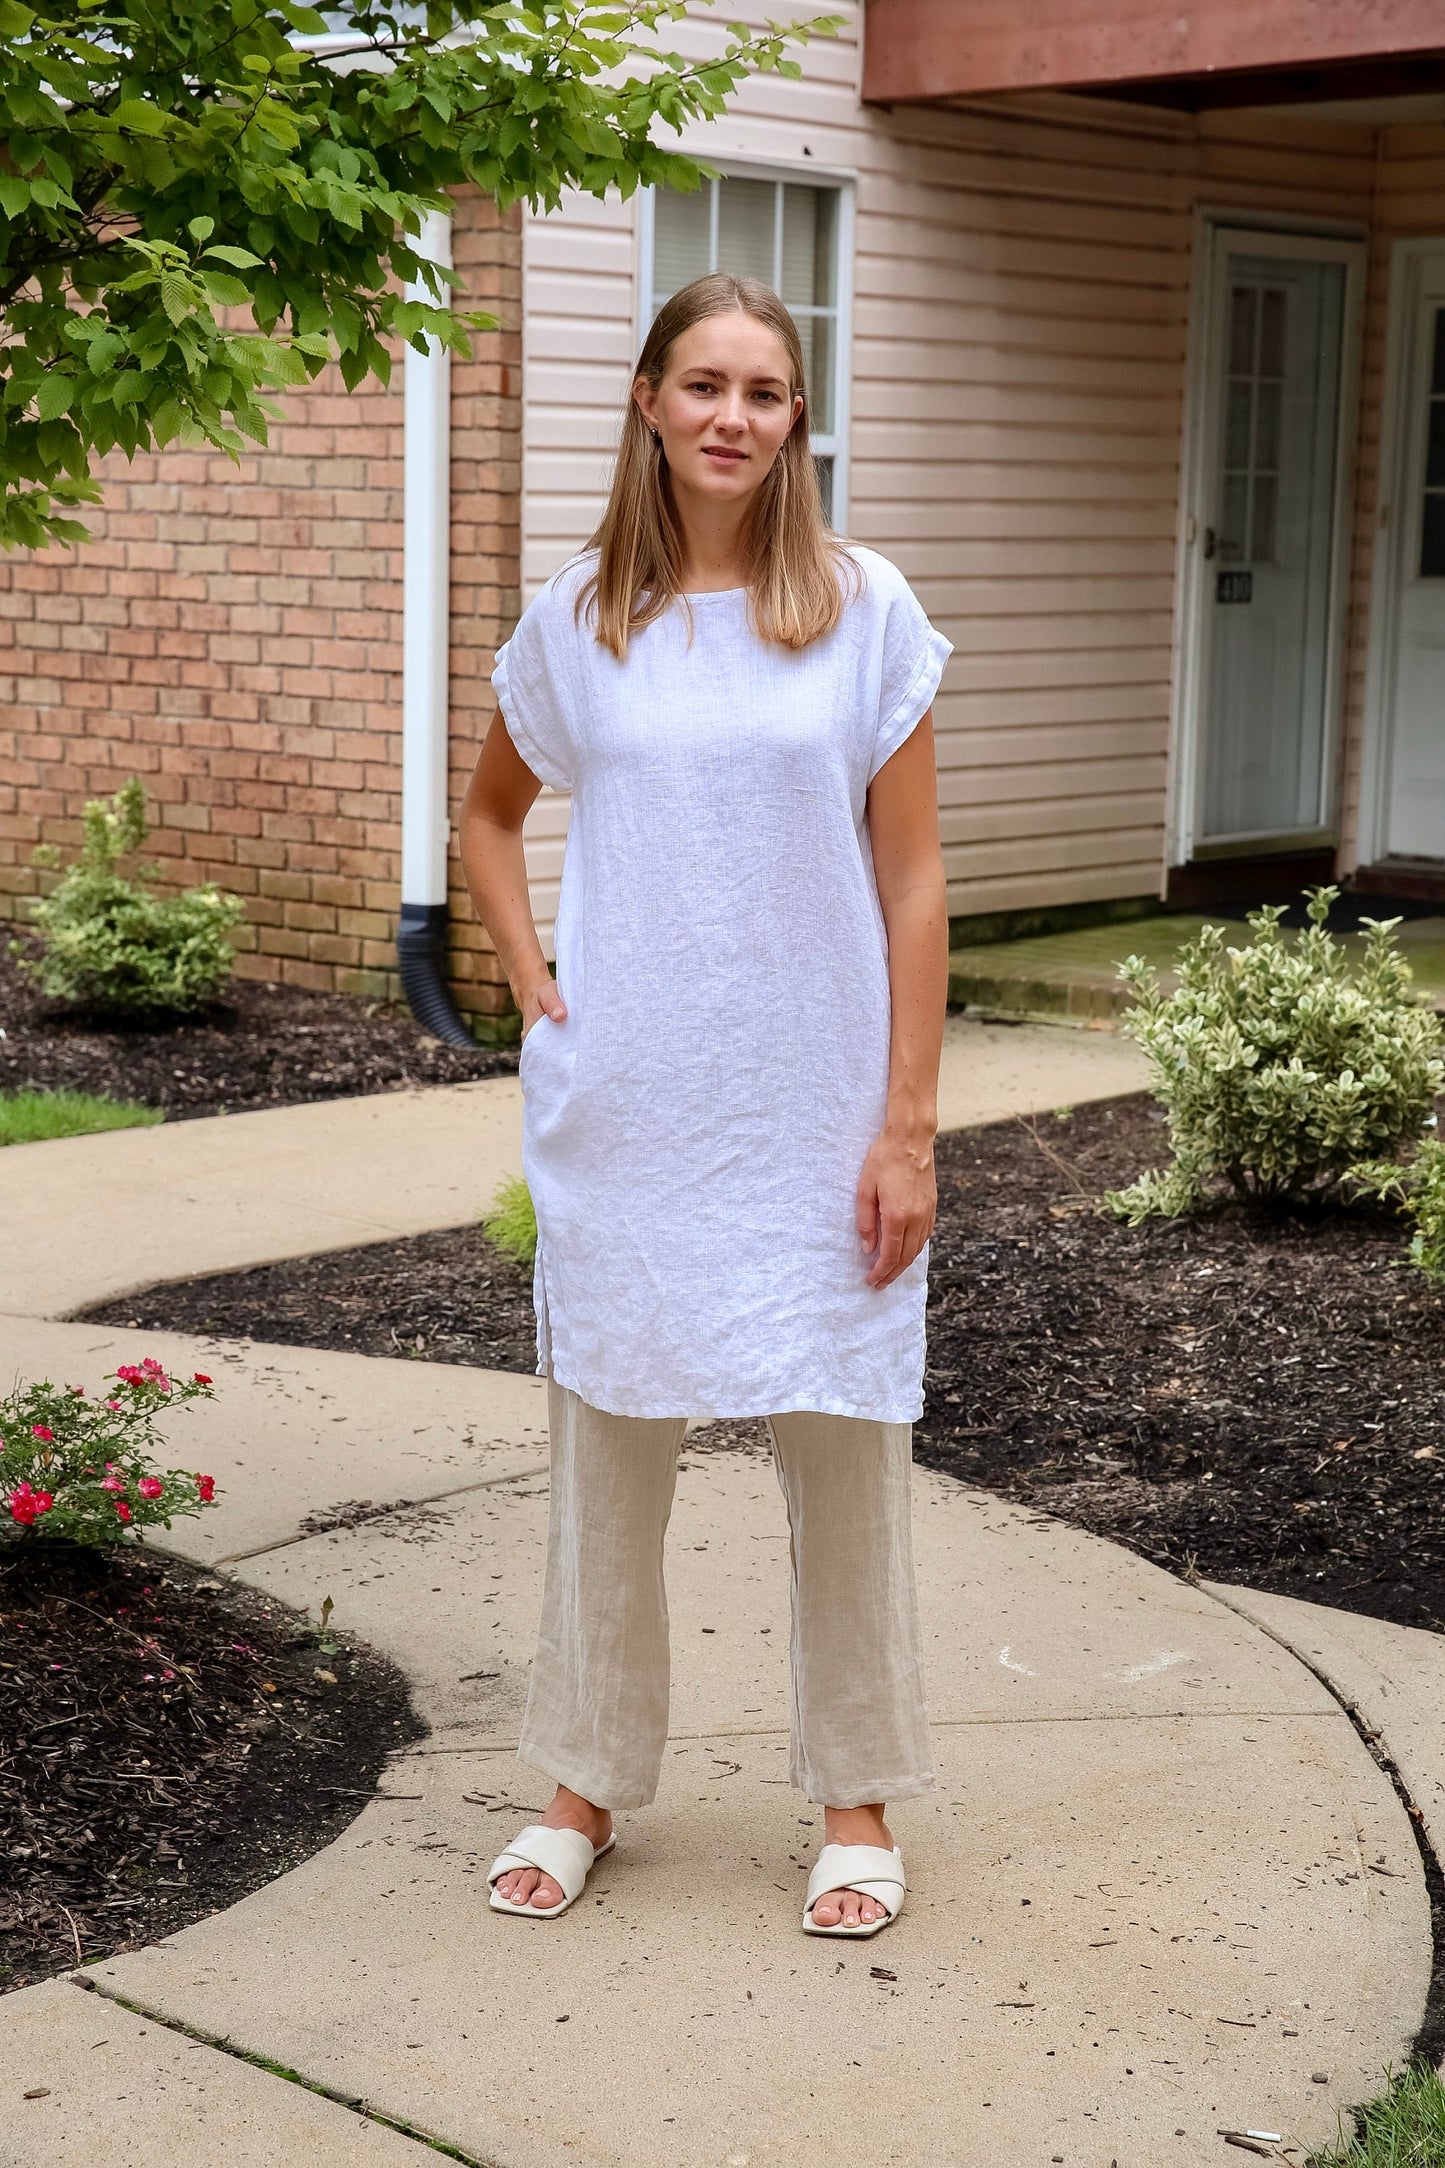 Graceful silhouette in a soft, comfortable linen homecoming dress.